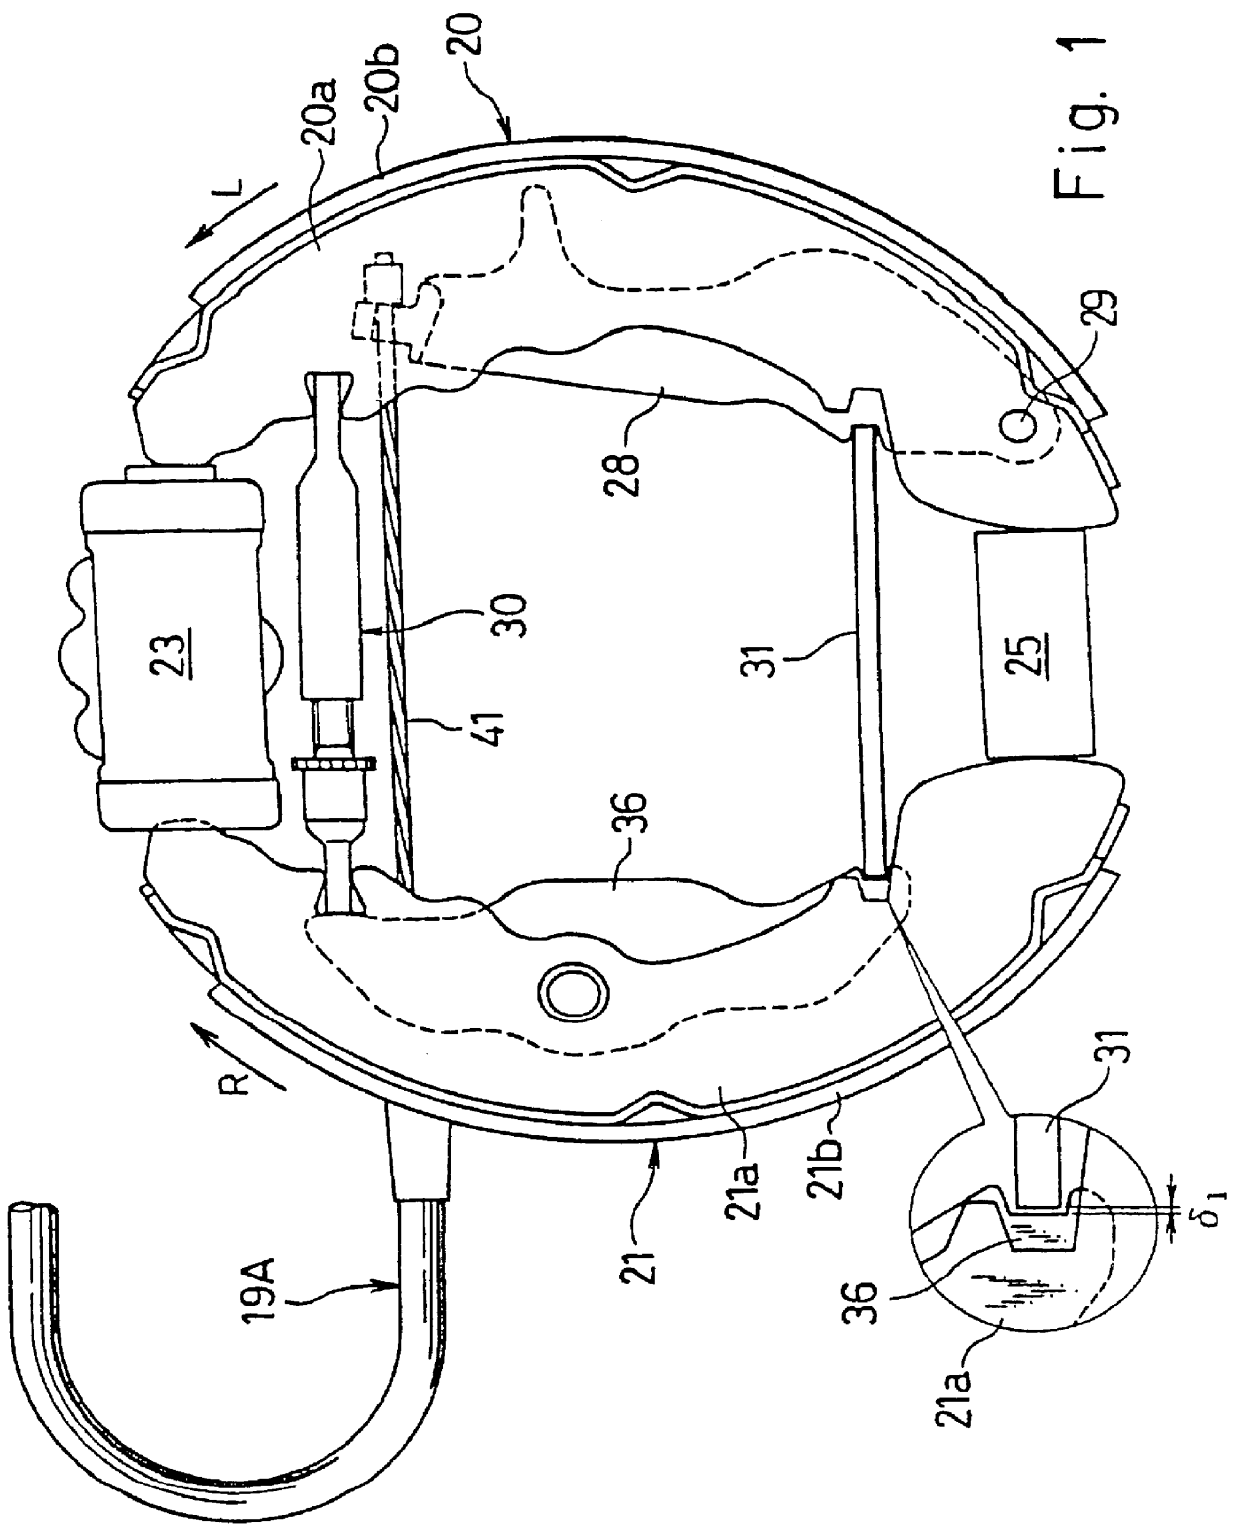 Drum brake system and device